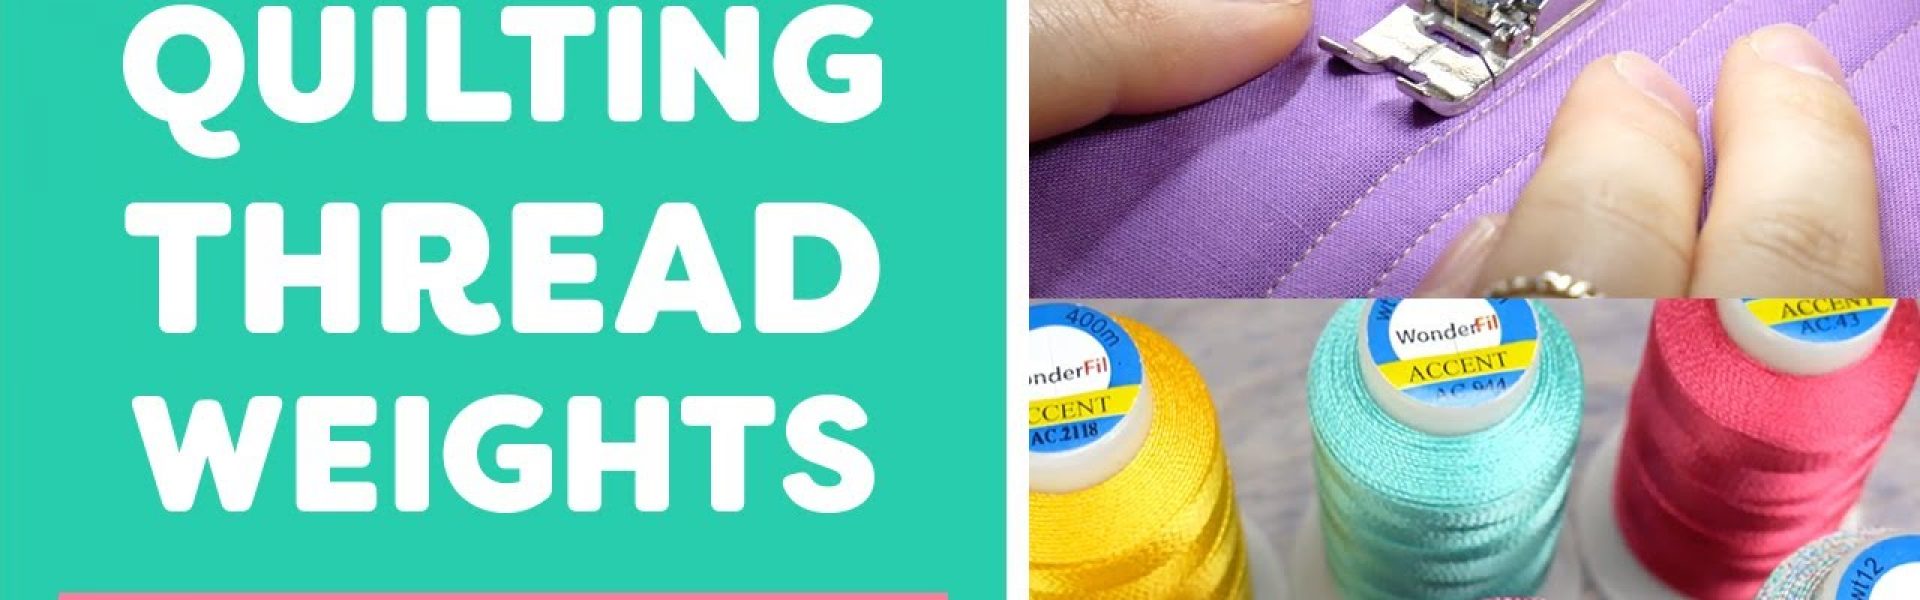 Comparing quilting thread weights, 100wt vs 40wt vs 12wt